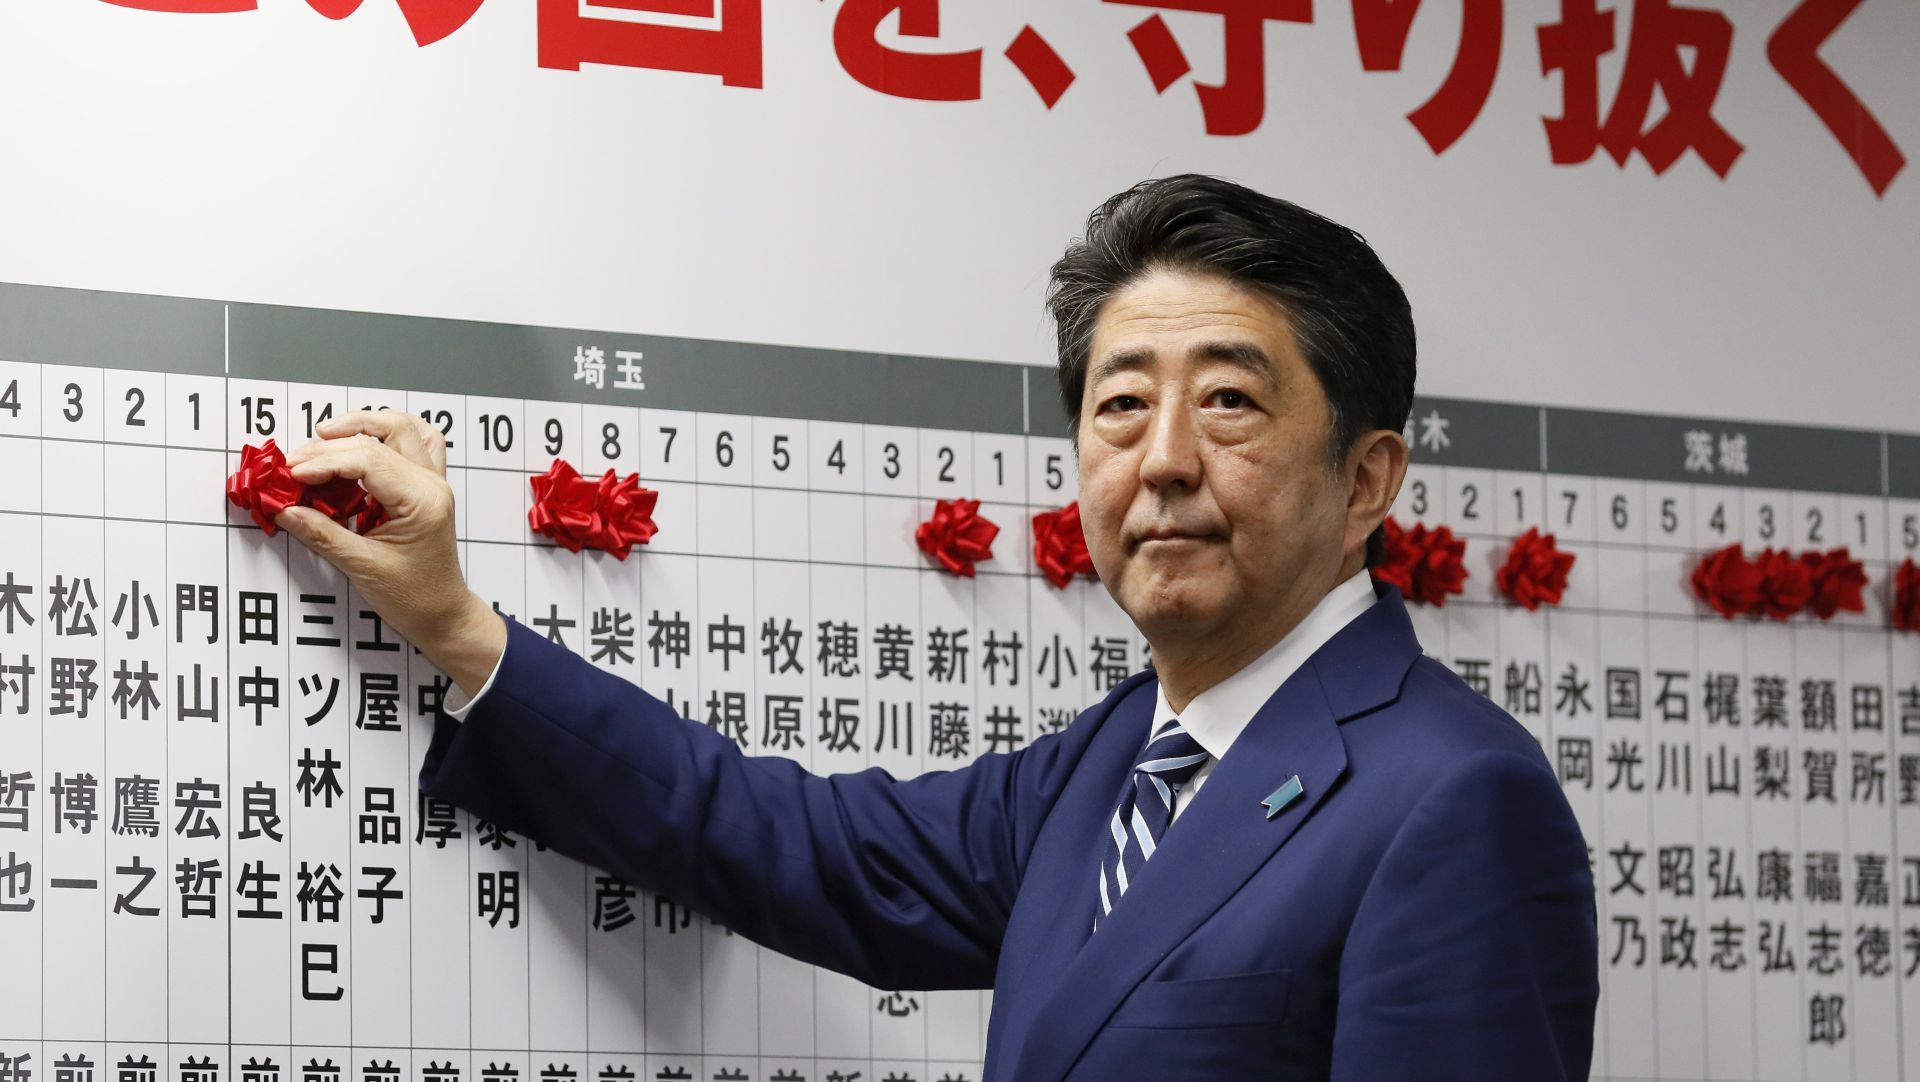 epa06282186 Japanese Prime Minister Shinzo Abe puts a red rose on name of a party's candidate to be elected in the Lower House election at headquarters of the ruling Liberal Democratic Party (LDP) in Tokyo, Japan, 22 October 2017. The LDP and a coalition partner are expected to win landslide victory in the election. The Japanese characters reads, 'Defend this country'.  EPA/KIMIMASA MAYAMA